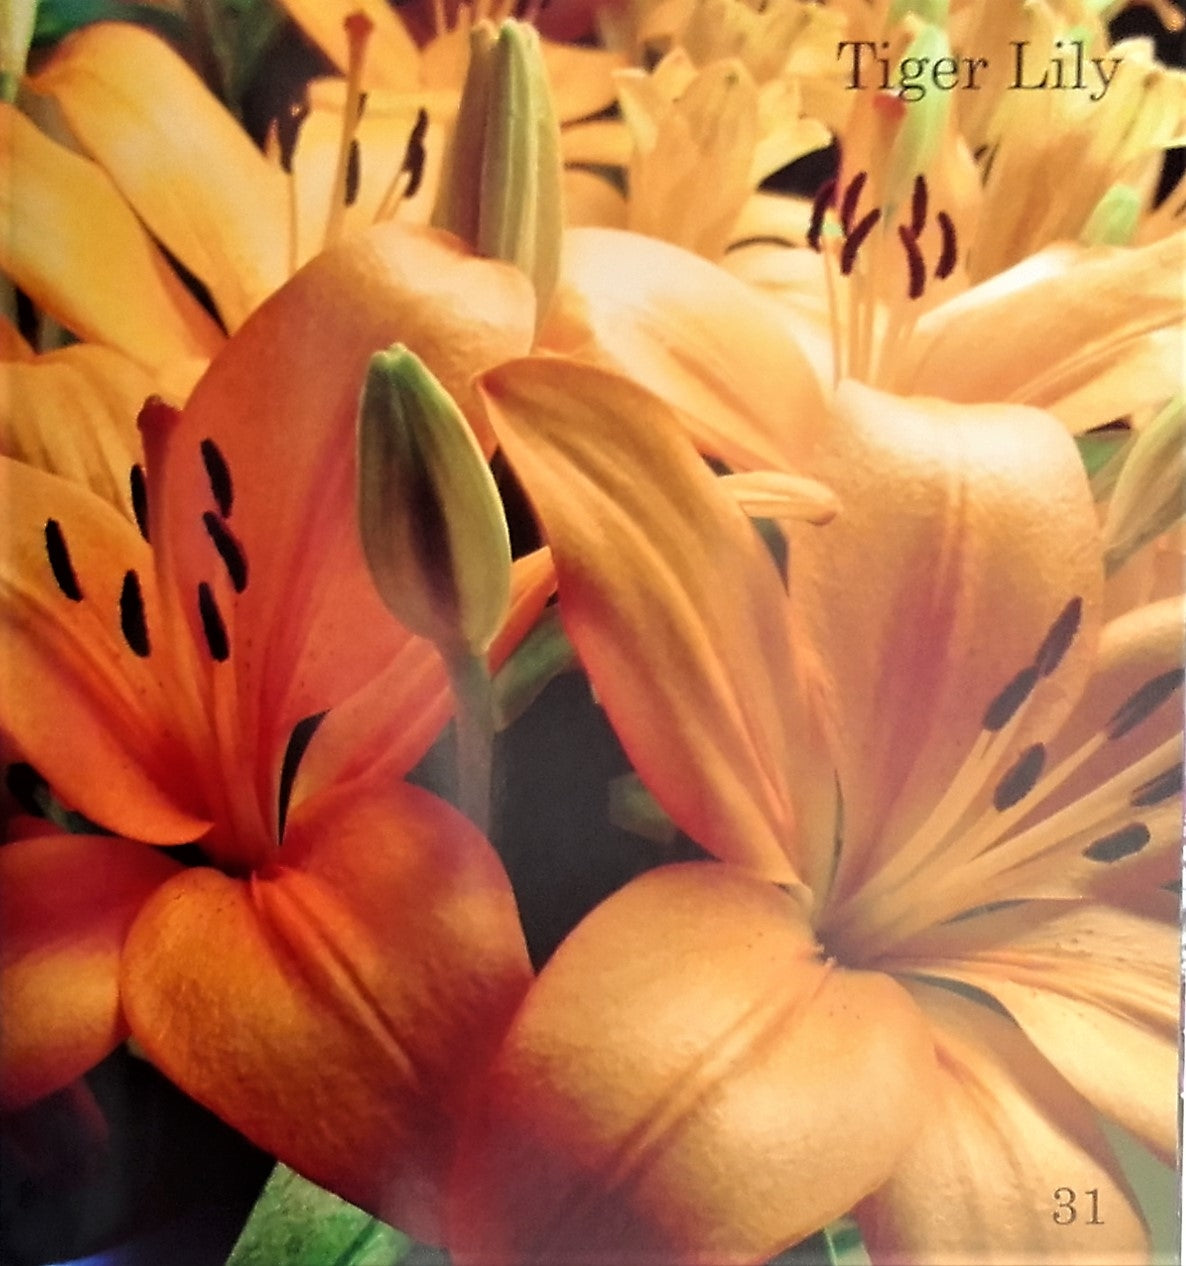 Picture Book - Flowers (Hard Cover)